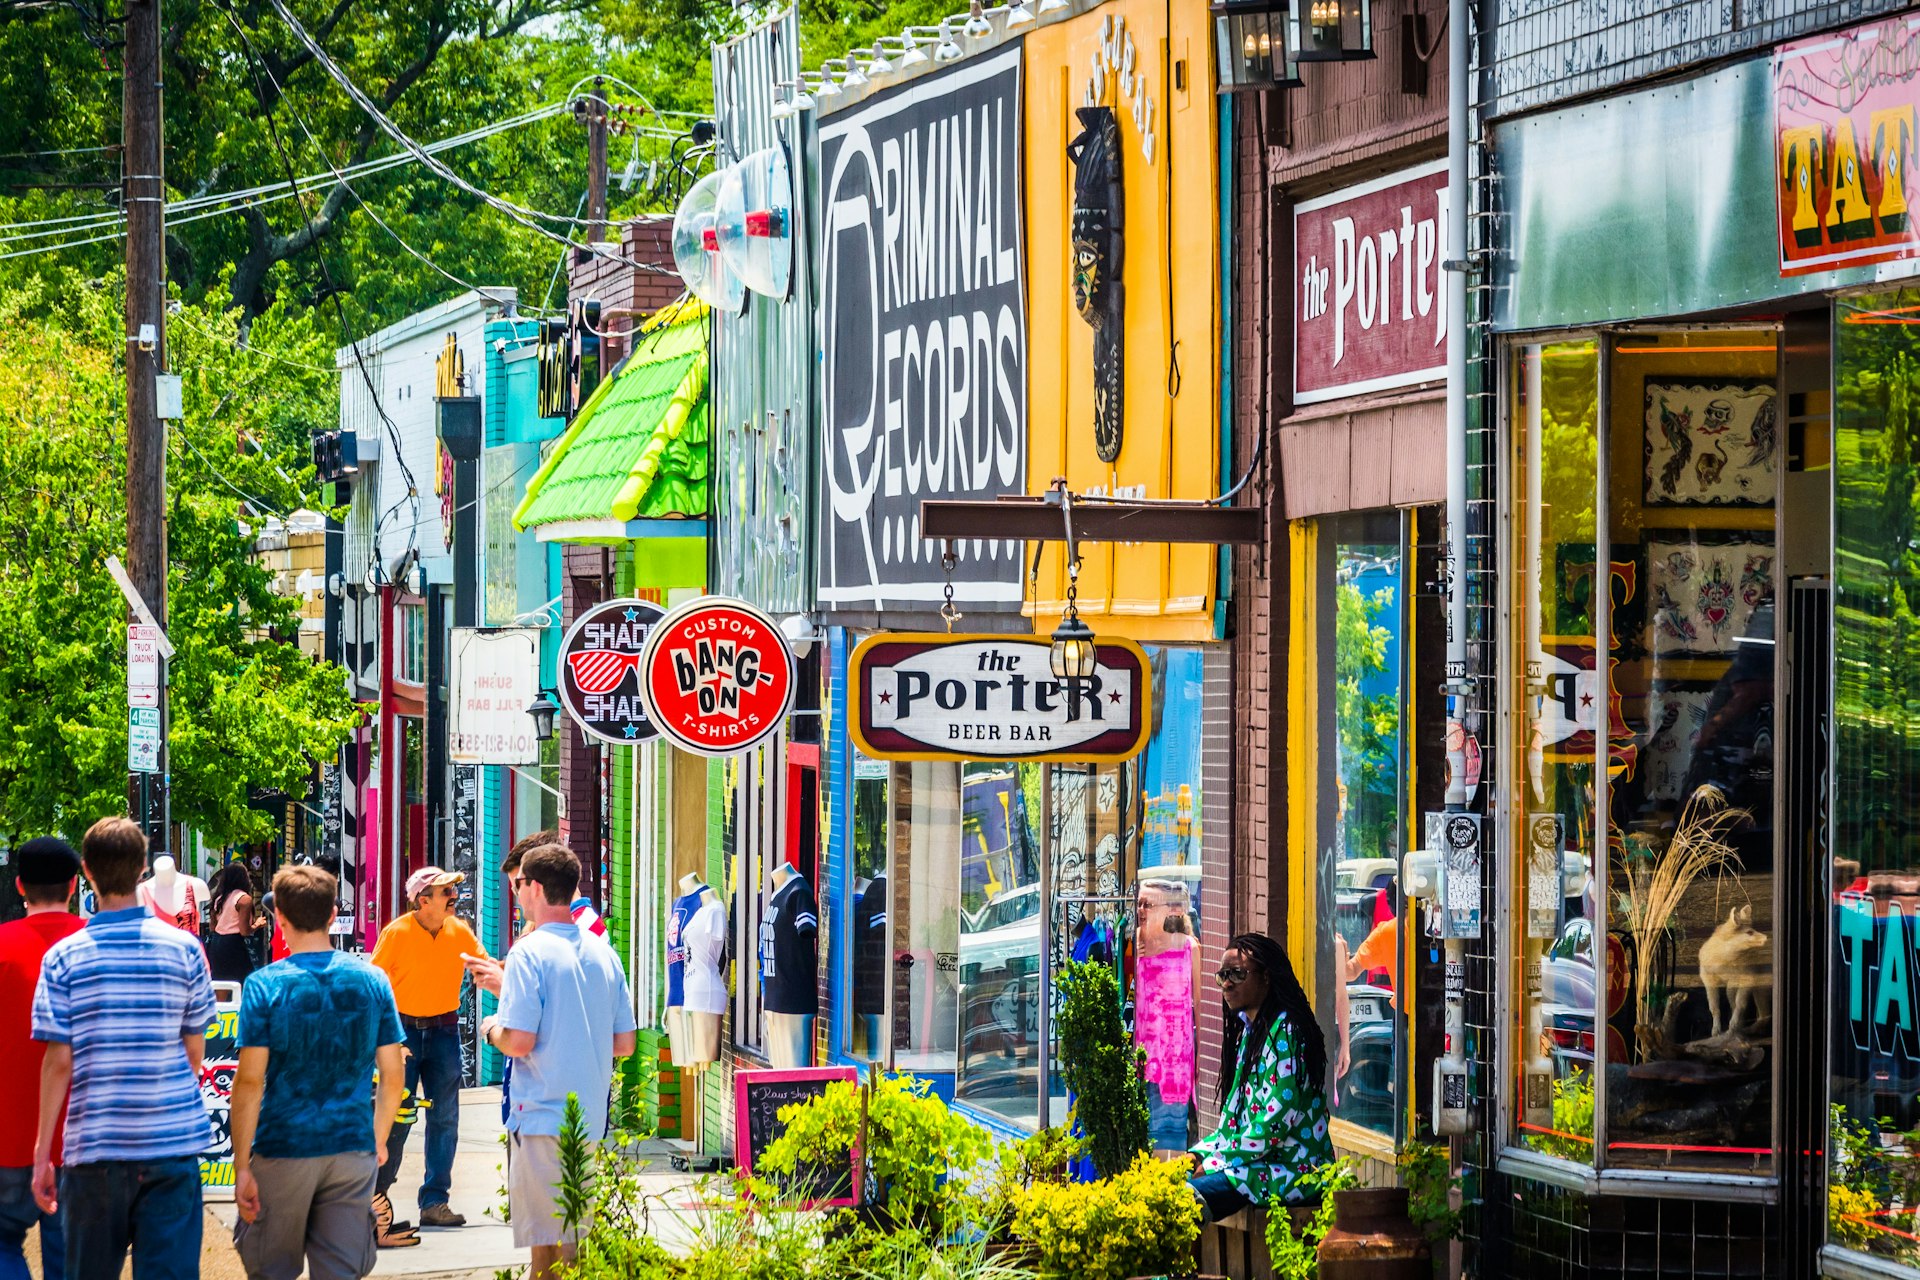 Pedestrians stroll past colorful storefronts in the Little Five Points neighborhood in Altlanta on a sunny day